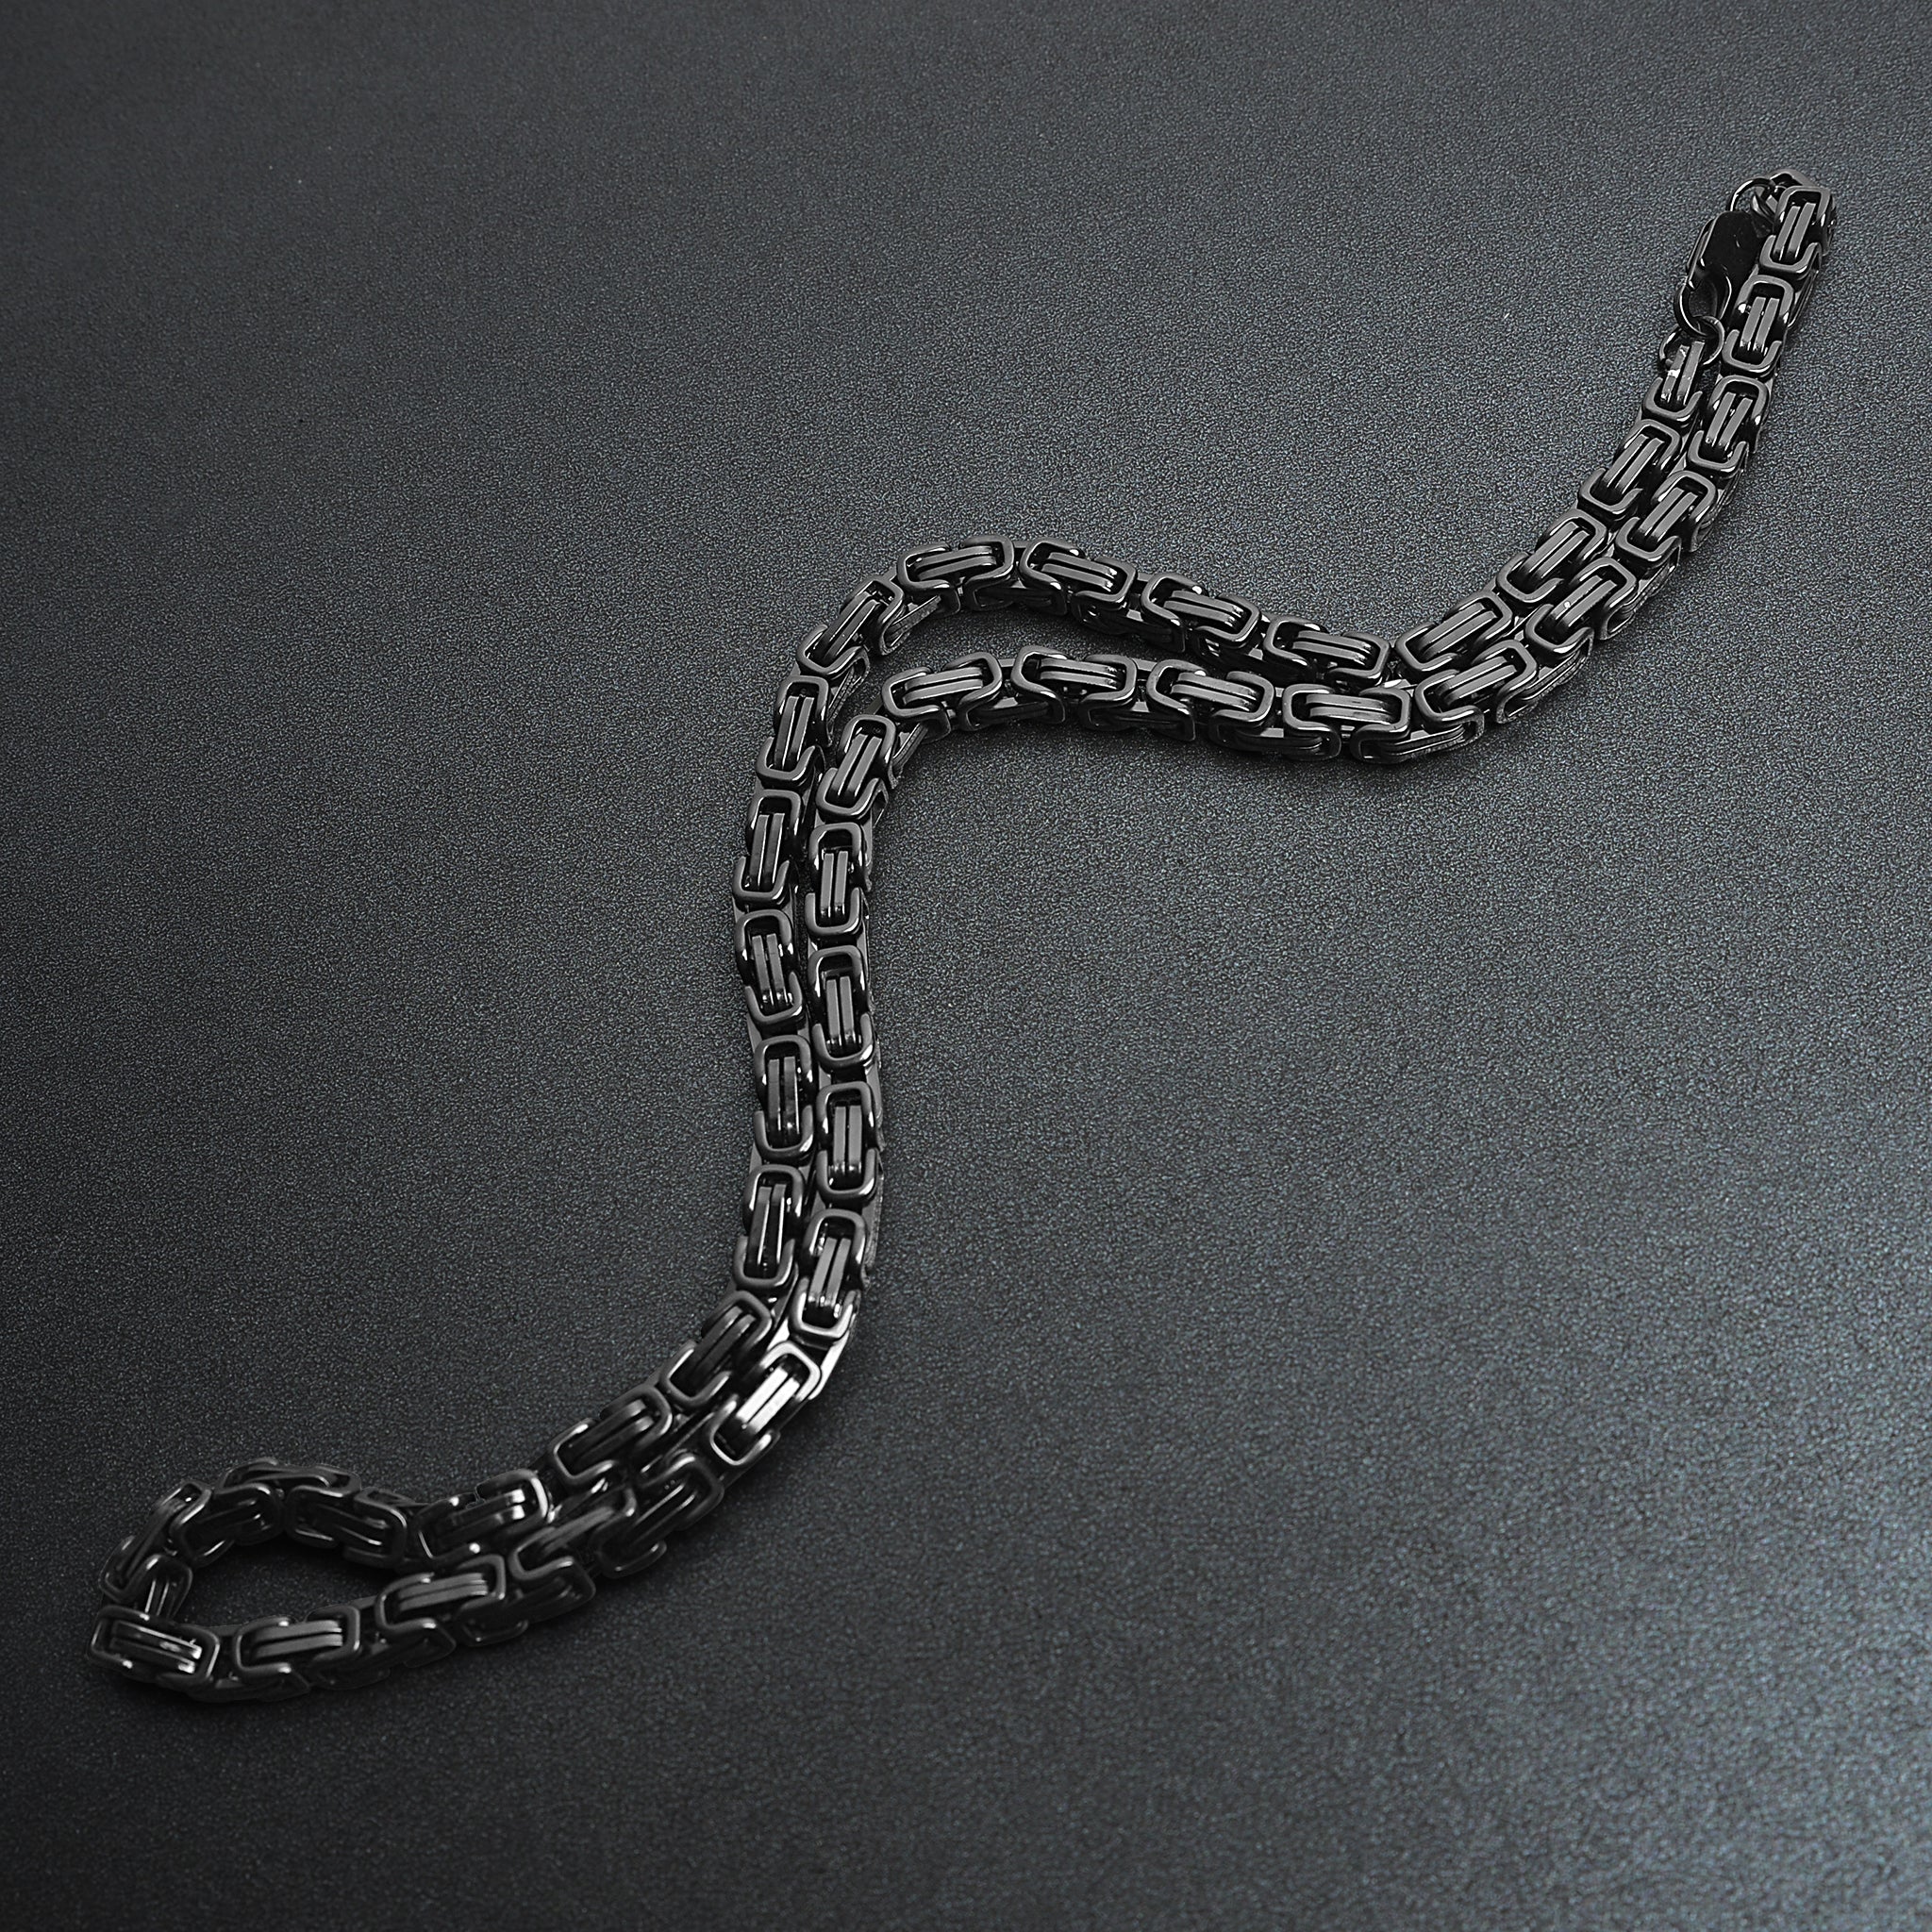 Black Stainless Steel Snake Chain Necklace